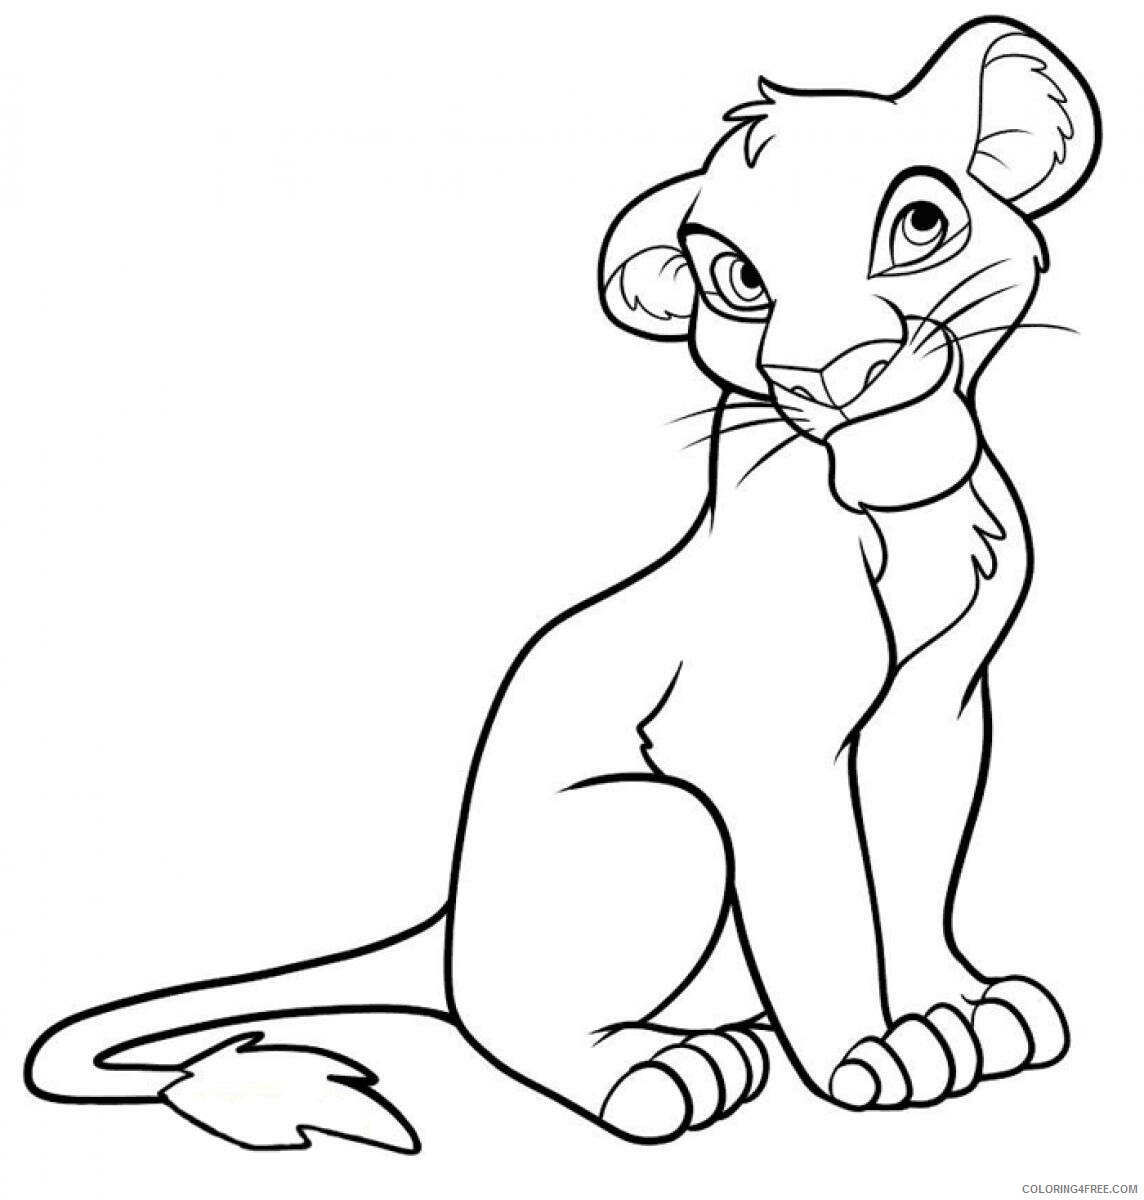 Simba Coloring Pages Simba Images Printable 2021 5408 Coloring4free